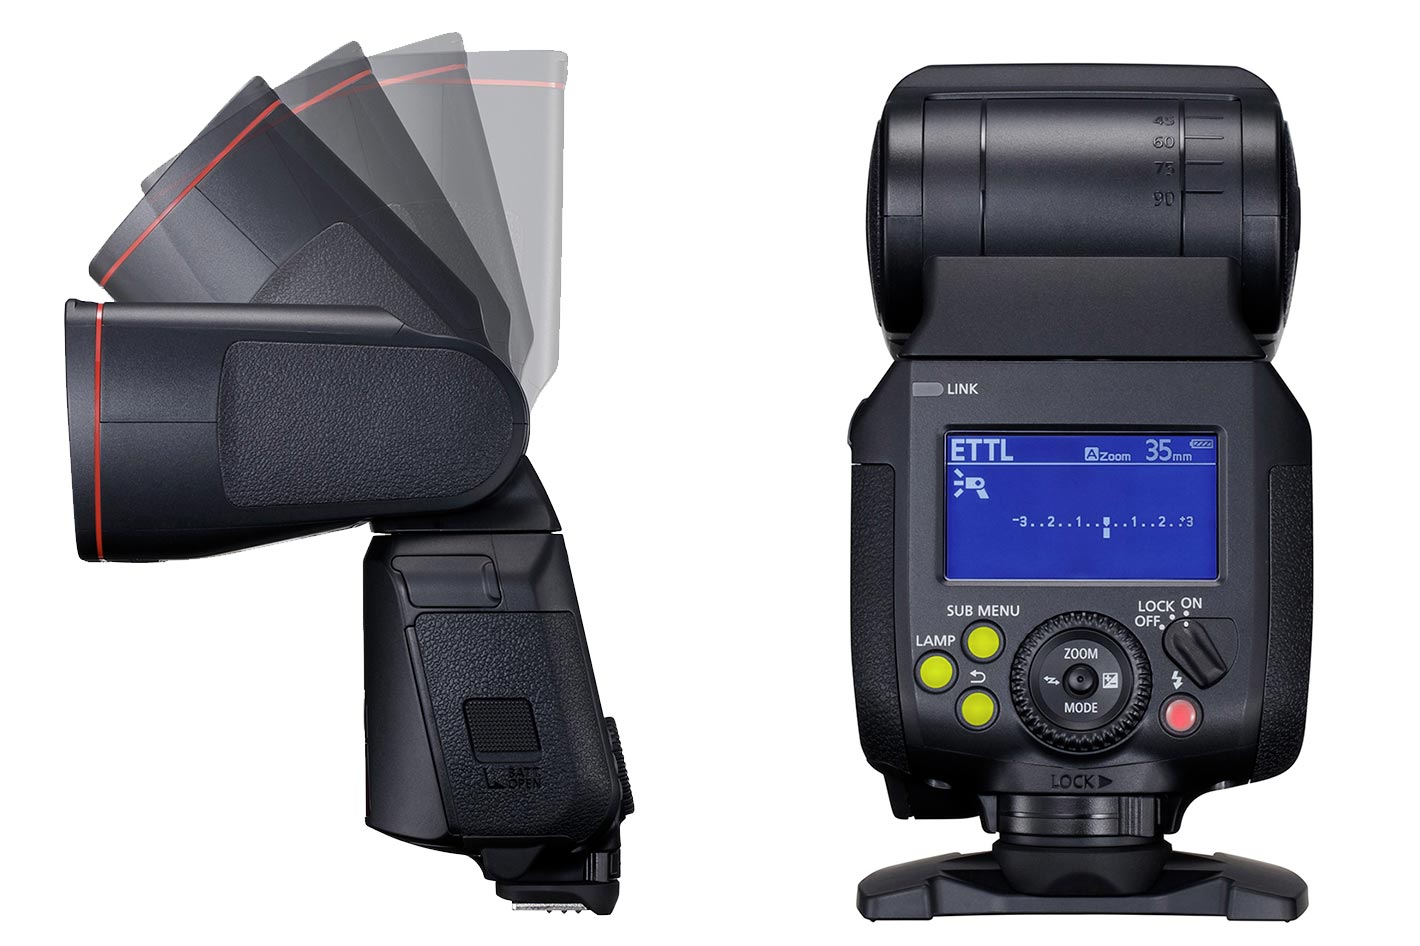 Canon's new flagship EL-1 Speedlite flash comes with updated interface and  new creative options: Digital Photography Review